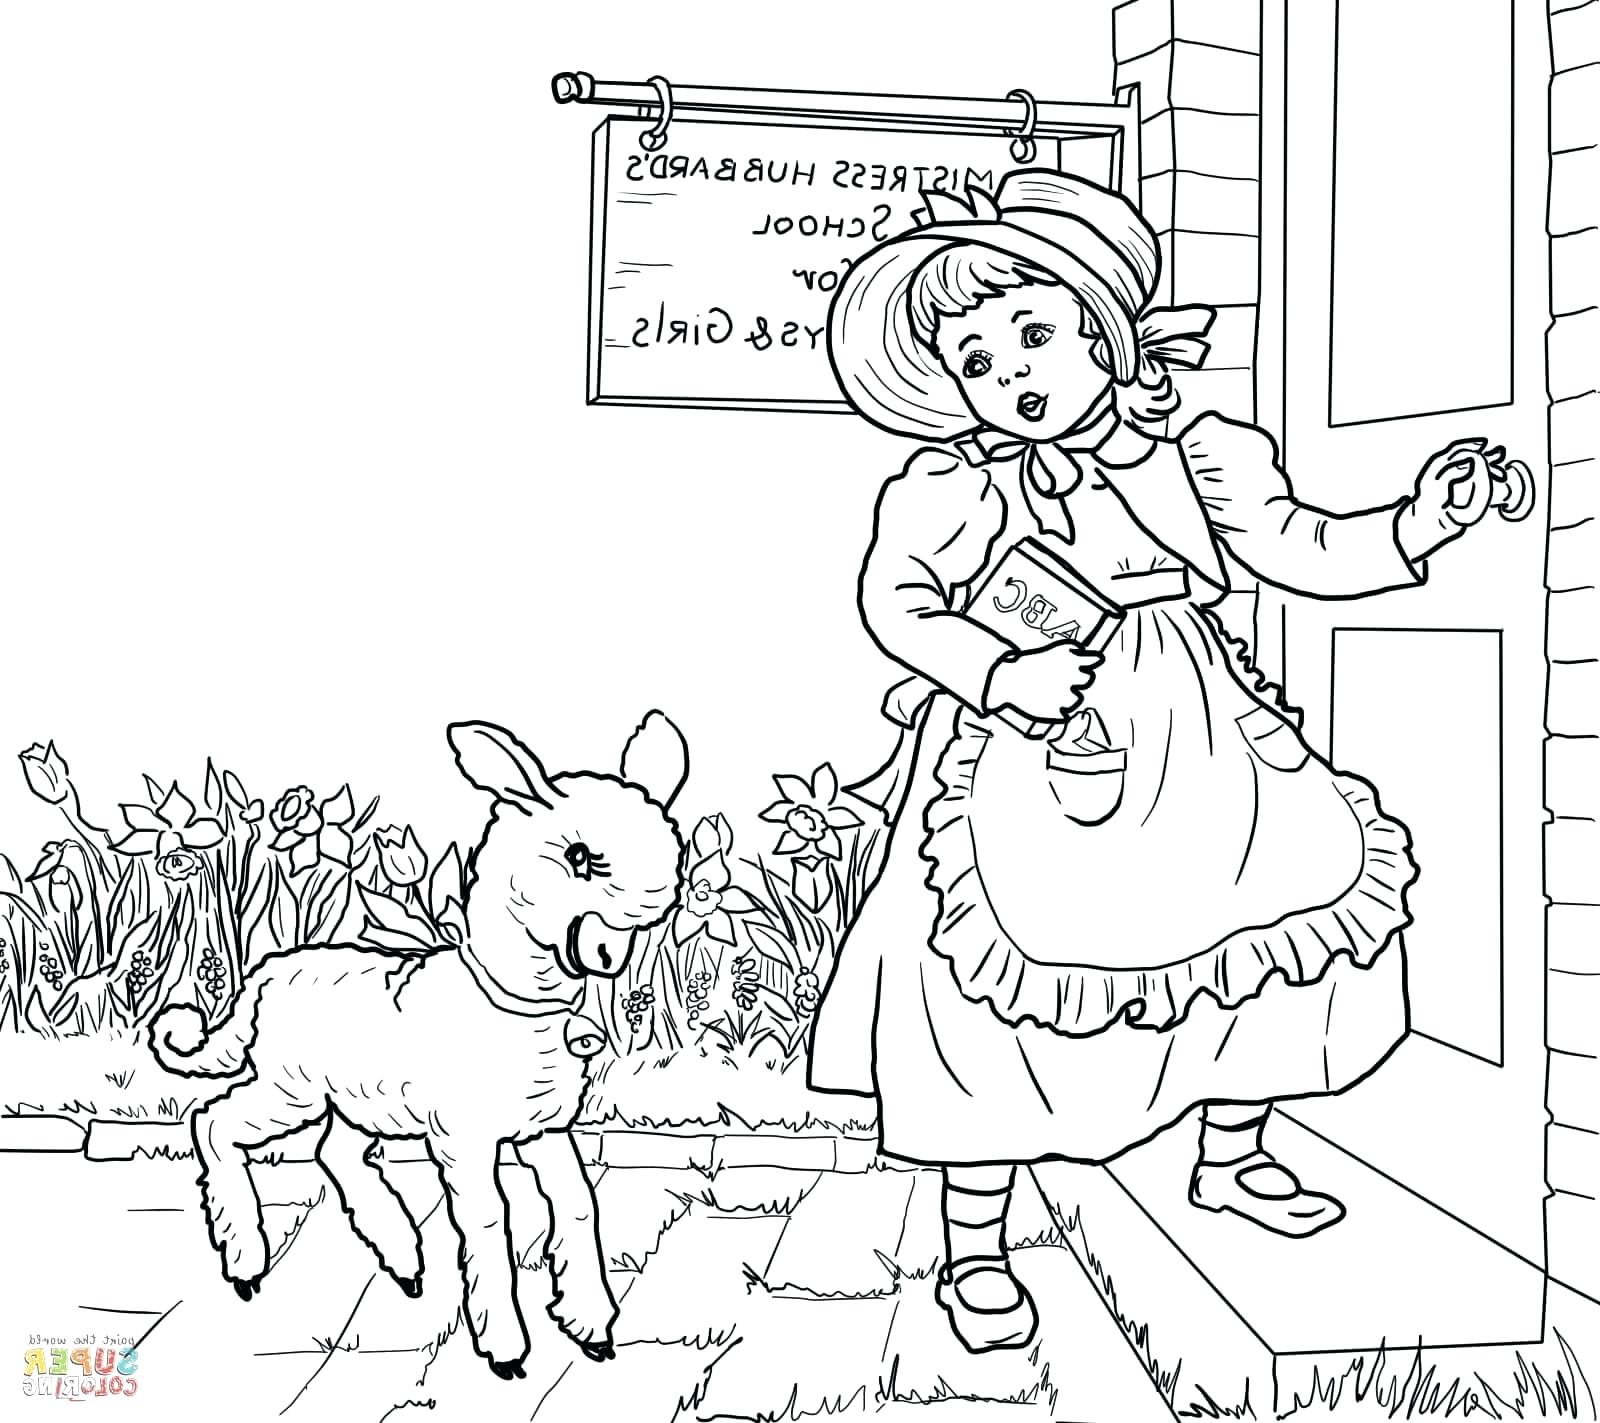 Mary Had A Little Lamb Coloring Page at Free